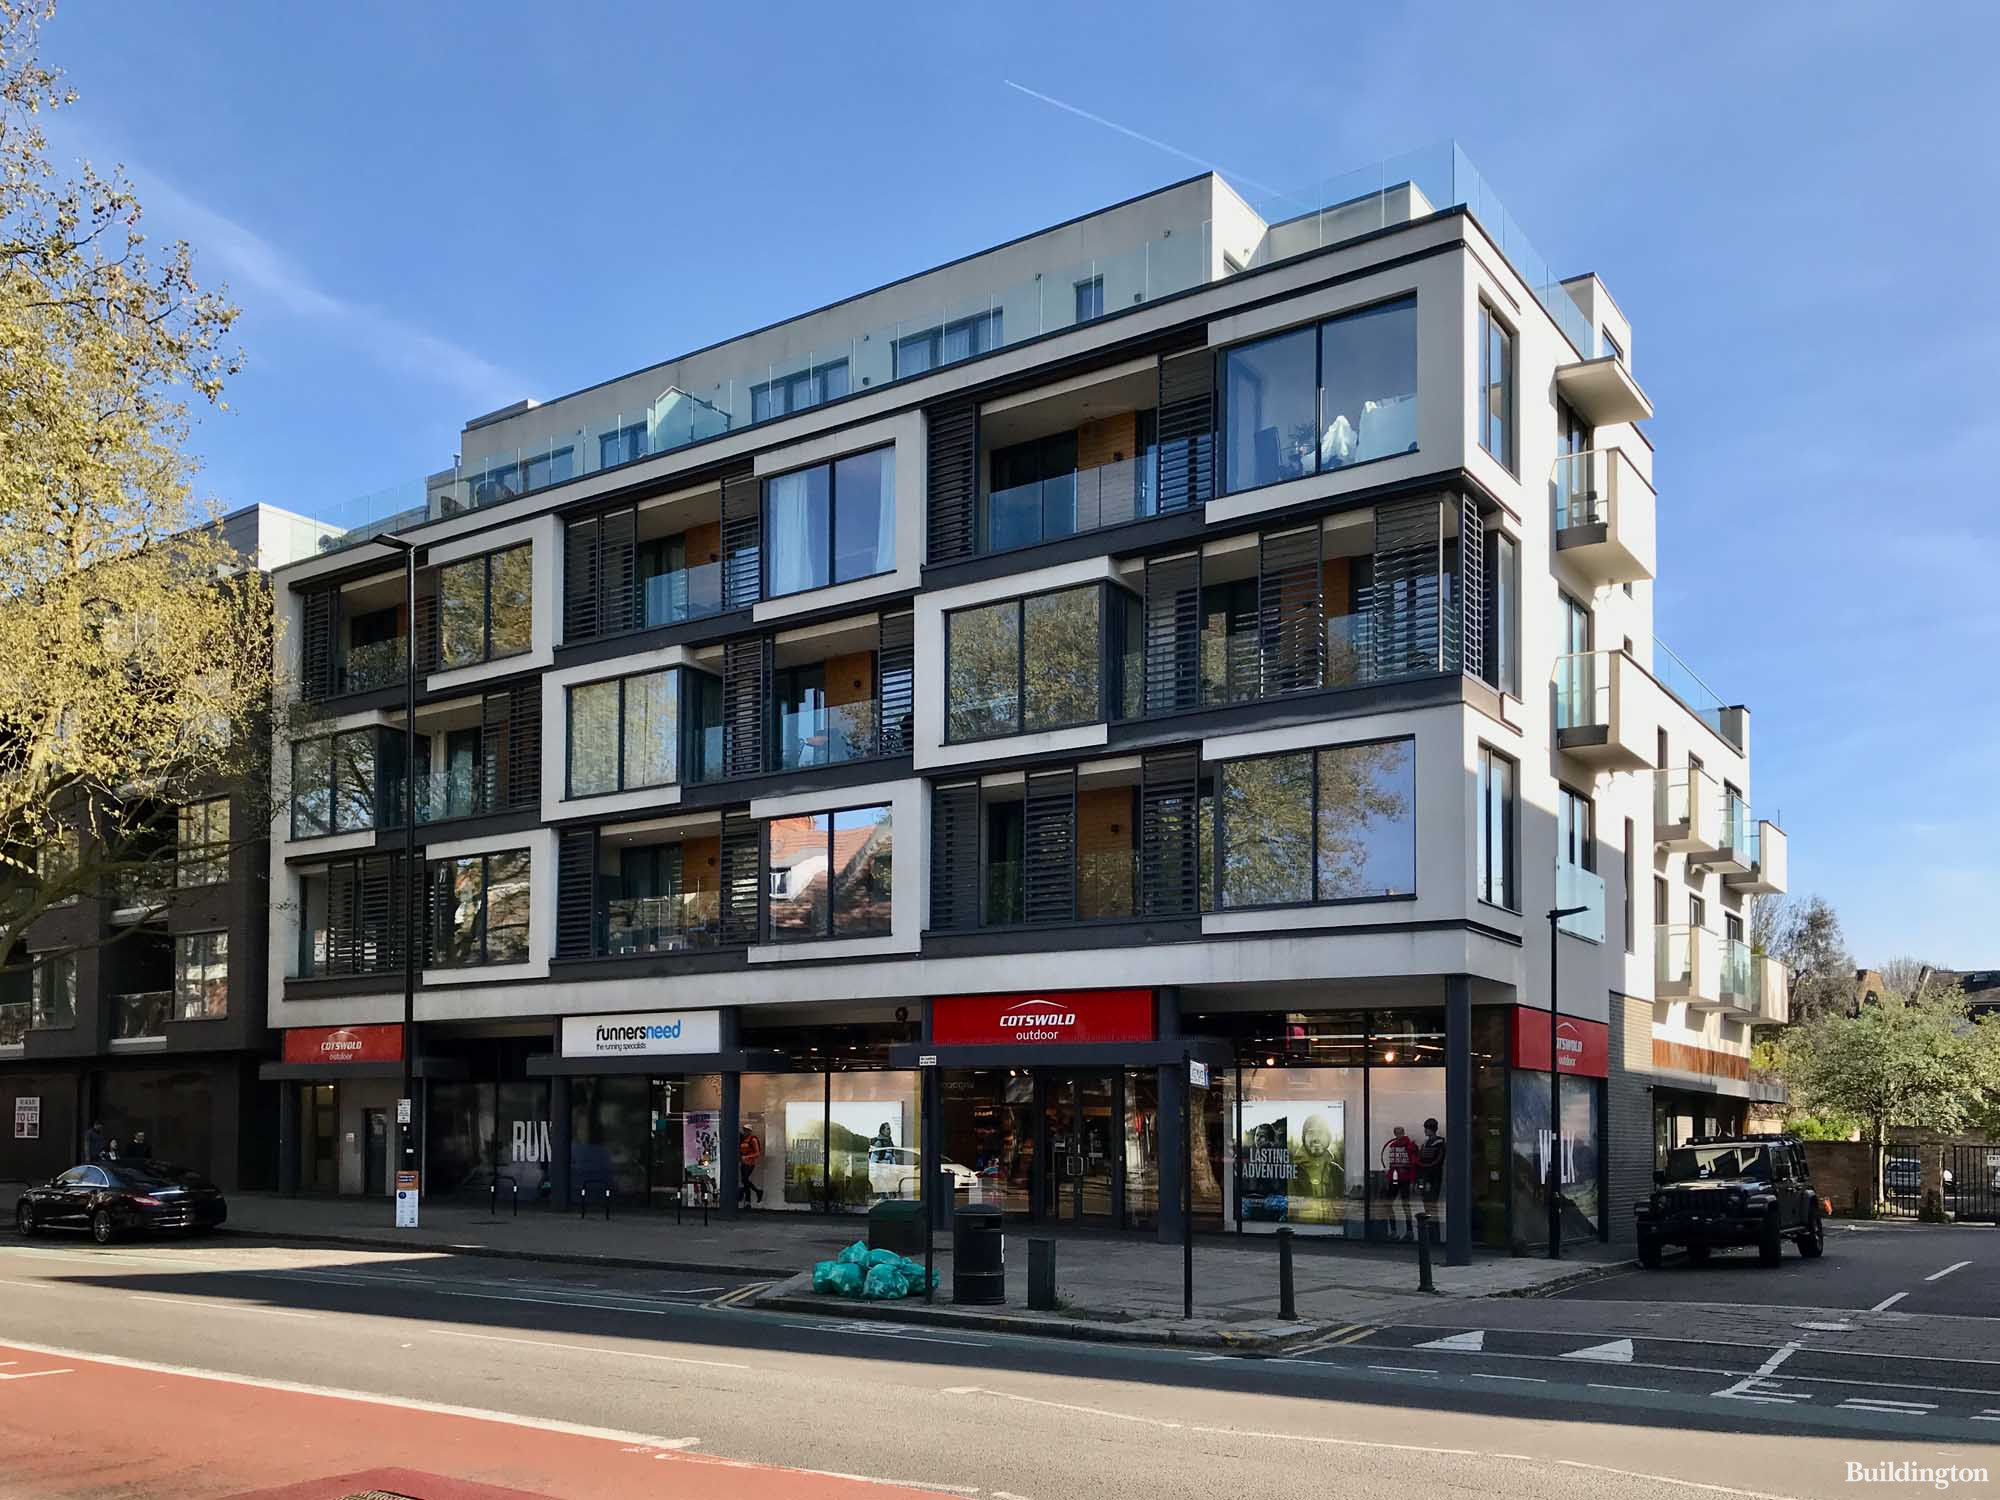 The Chiswick Corner Haus at 319-327 Chiswick High Road by Linden Homes in London W4.